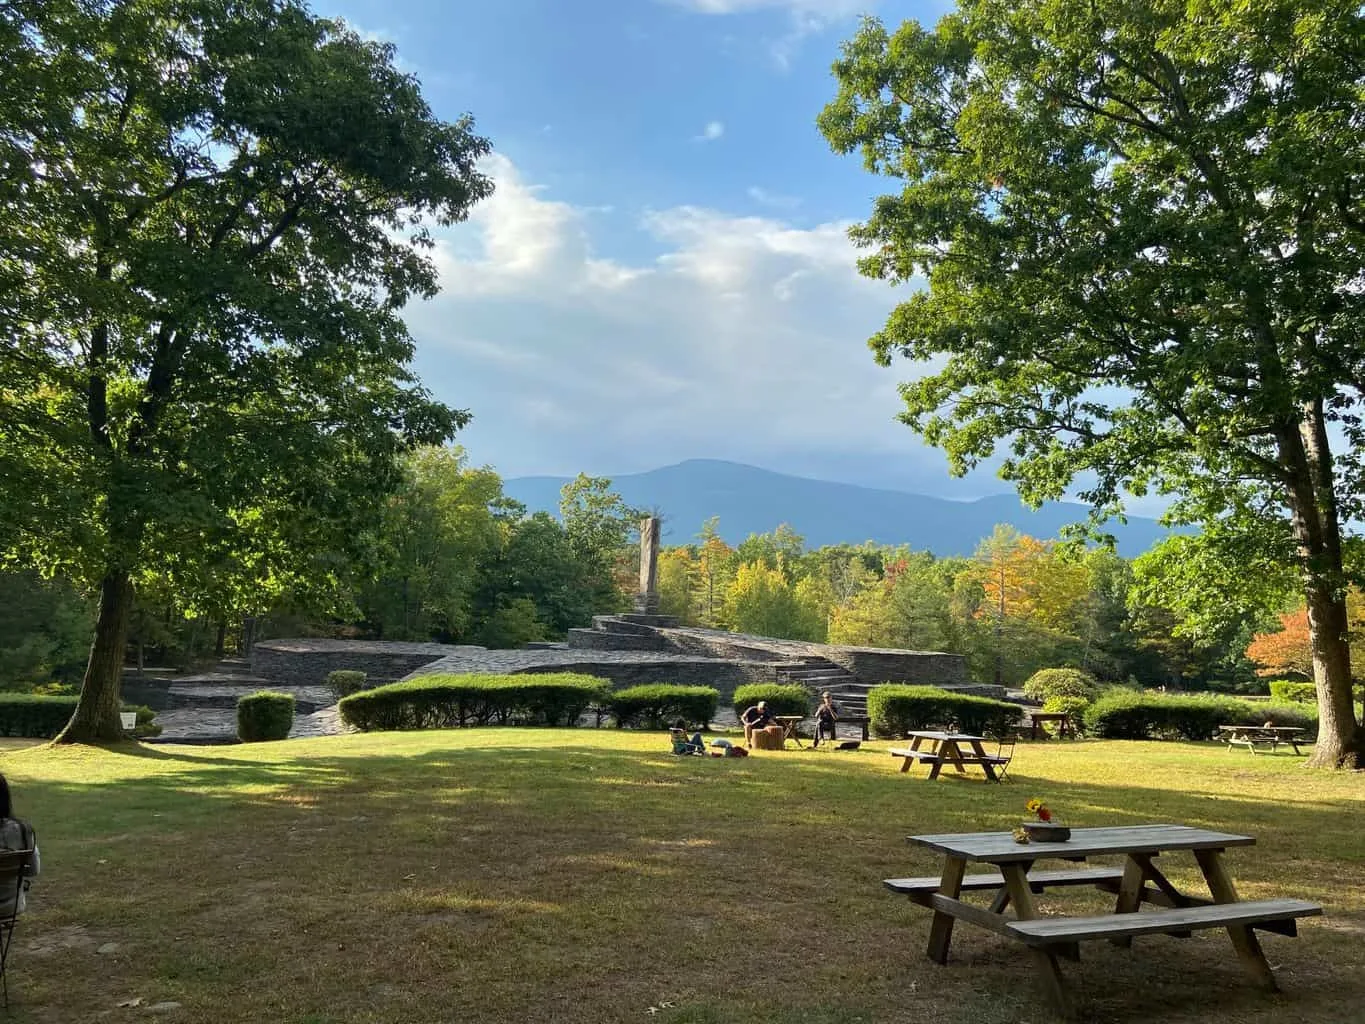 the stone structures of opus 40 with a picnnc table in the foreground and the catskill mountains behind. the foliage is changing color for fall